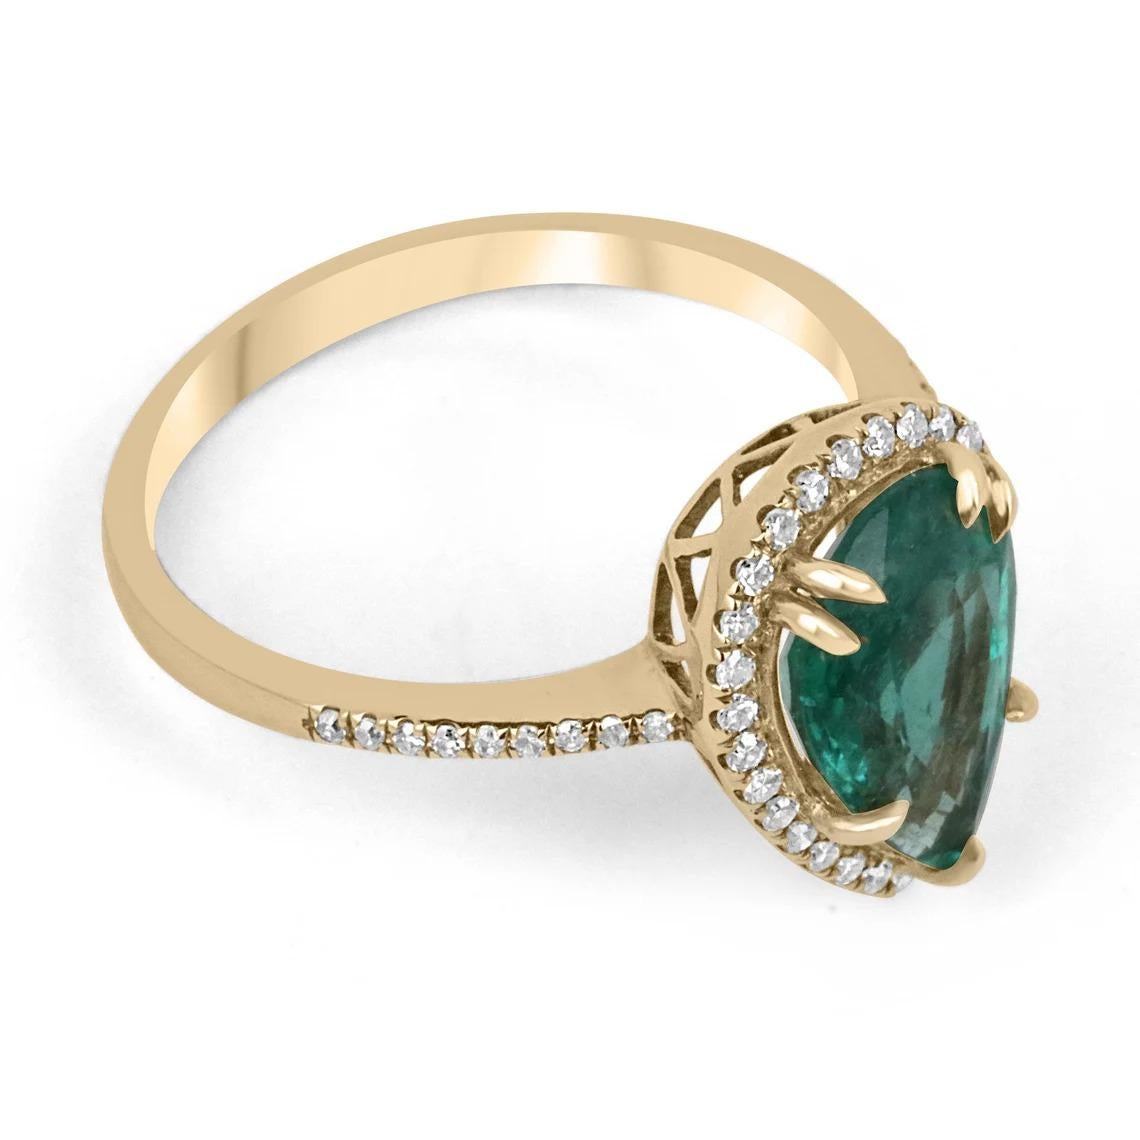 A ravishing emerald and diamond halo right-hand/engagement ring. This striking piece features a stunning pear-cut emerald from the natural origin of Zambia. The gemstone displays an alluring bluish-green hue with its natural medium green color. Very